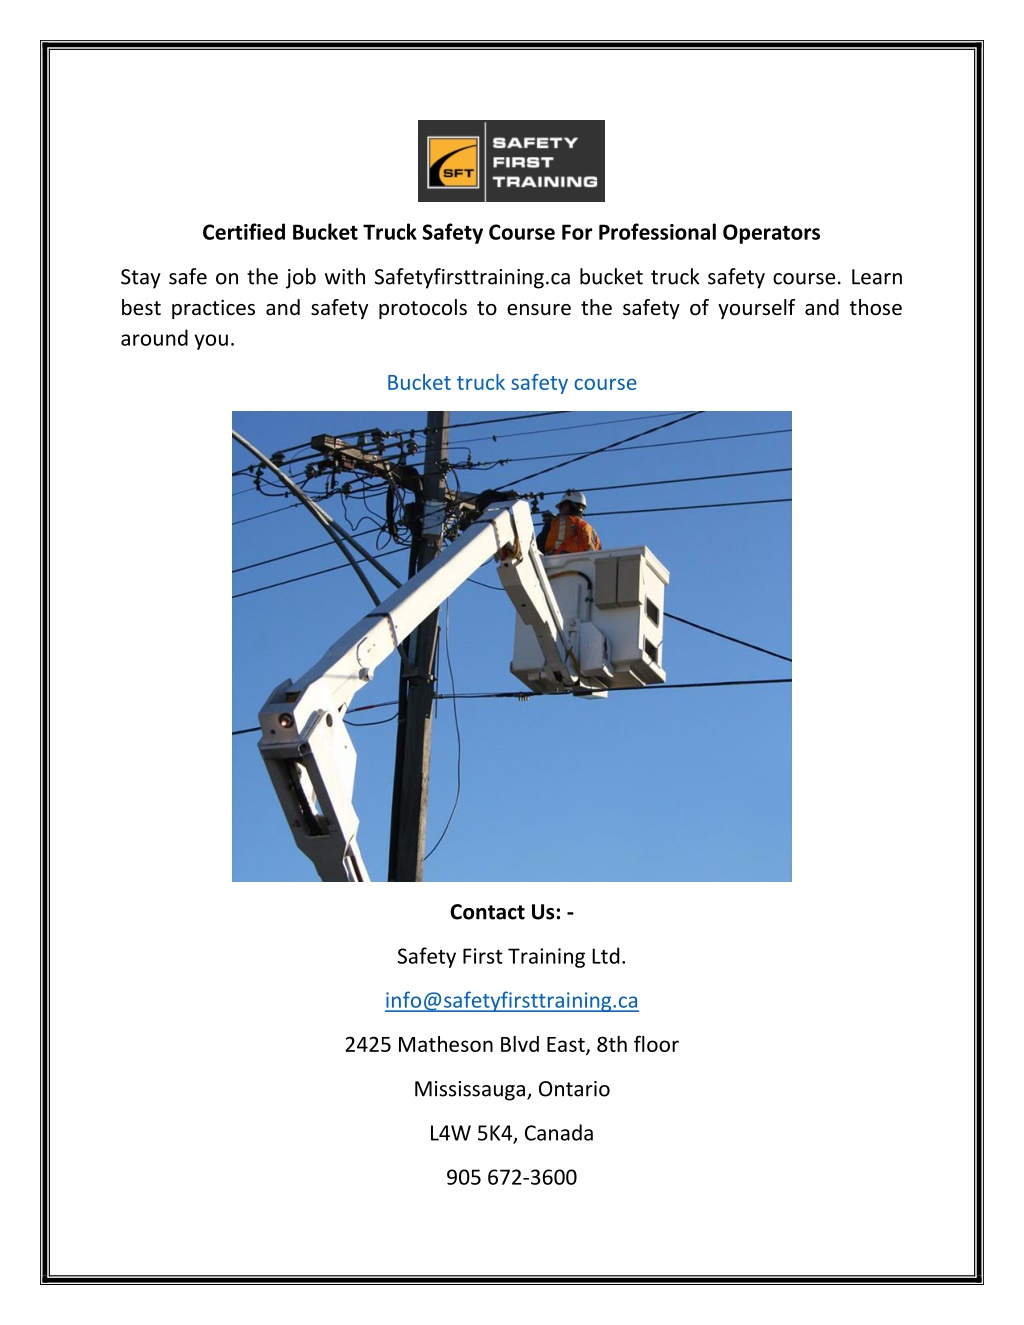 PPT Certified Bucket Truck Safety Course For Professional Operators